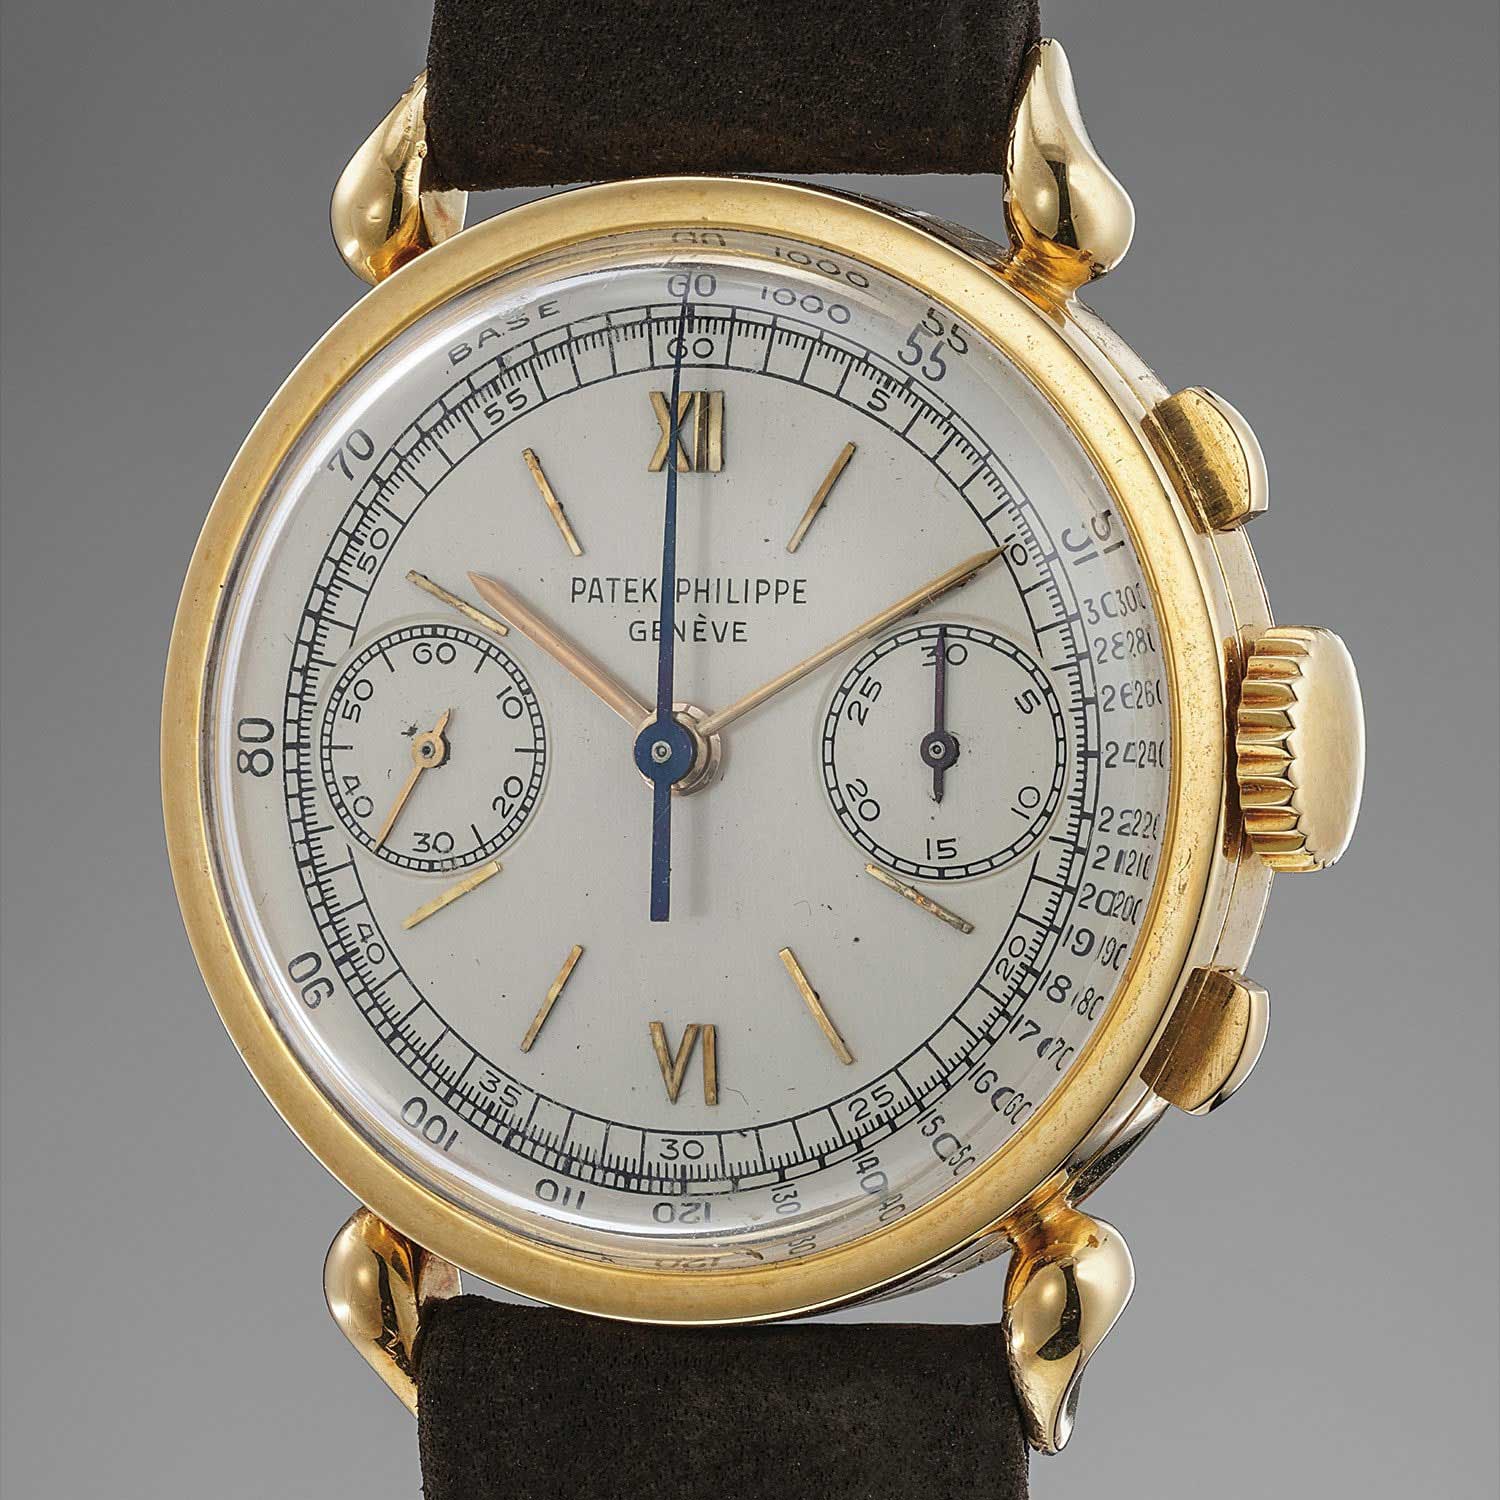 1941 Patek Philippe ref. 533 yellow gold chronograph with Roman numerals and “cornes de vache” style lugs (Image: phillipswatches.com)